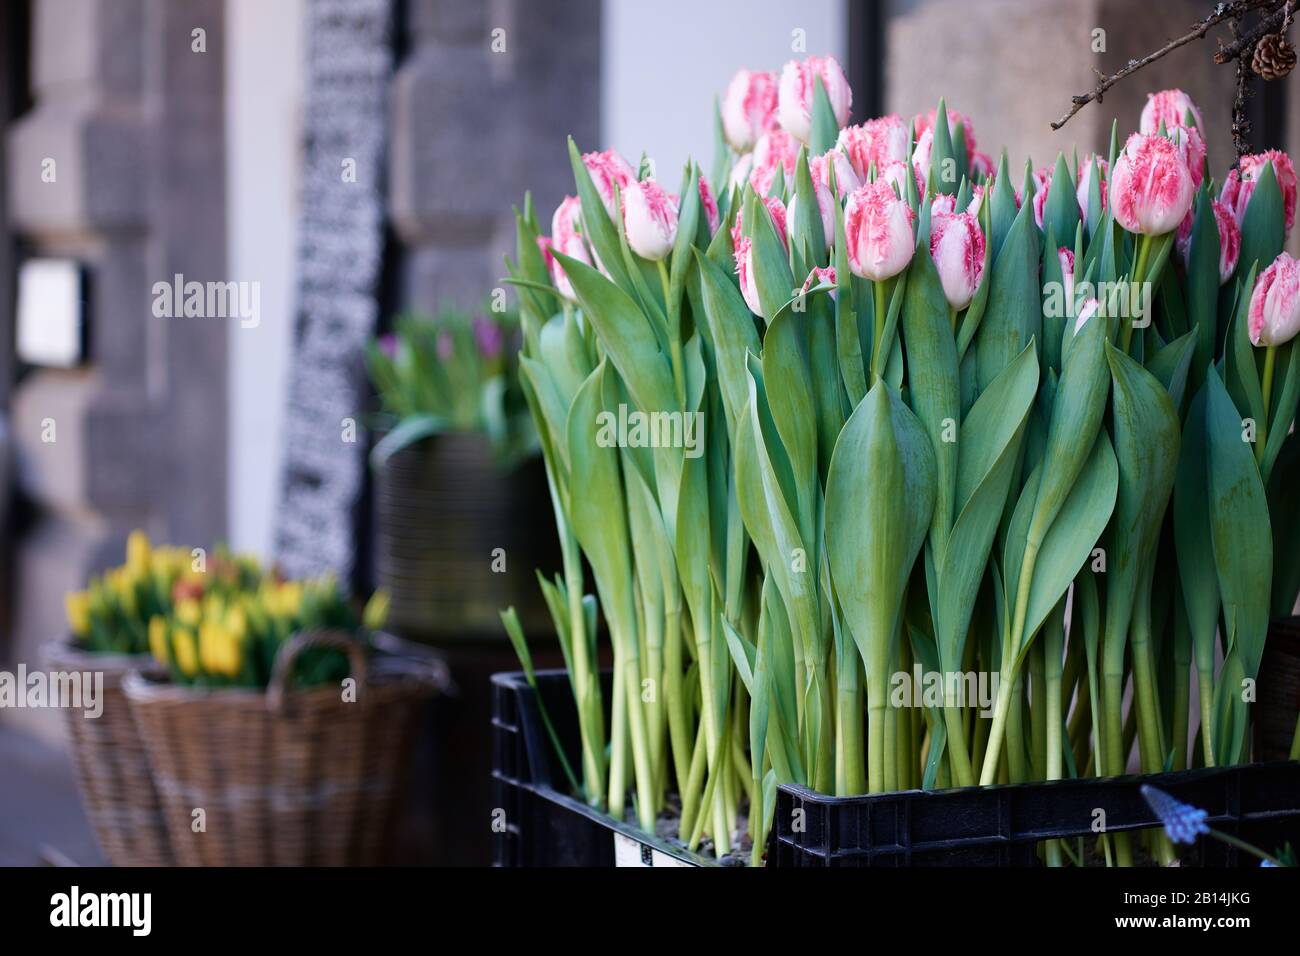 A crate full of fresh HuisTen Bosch tulips at a street shop display. These fringed pink petal flower tulips are from Holland. Stock Photo